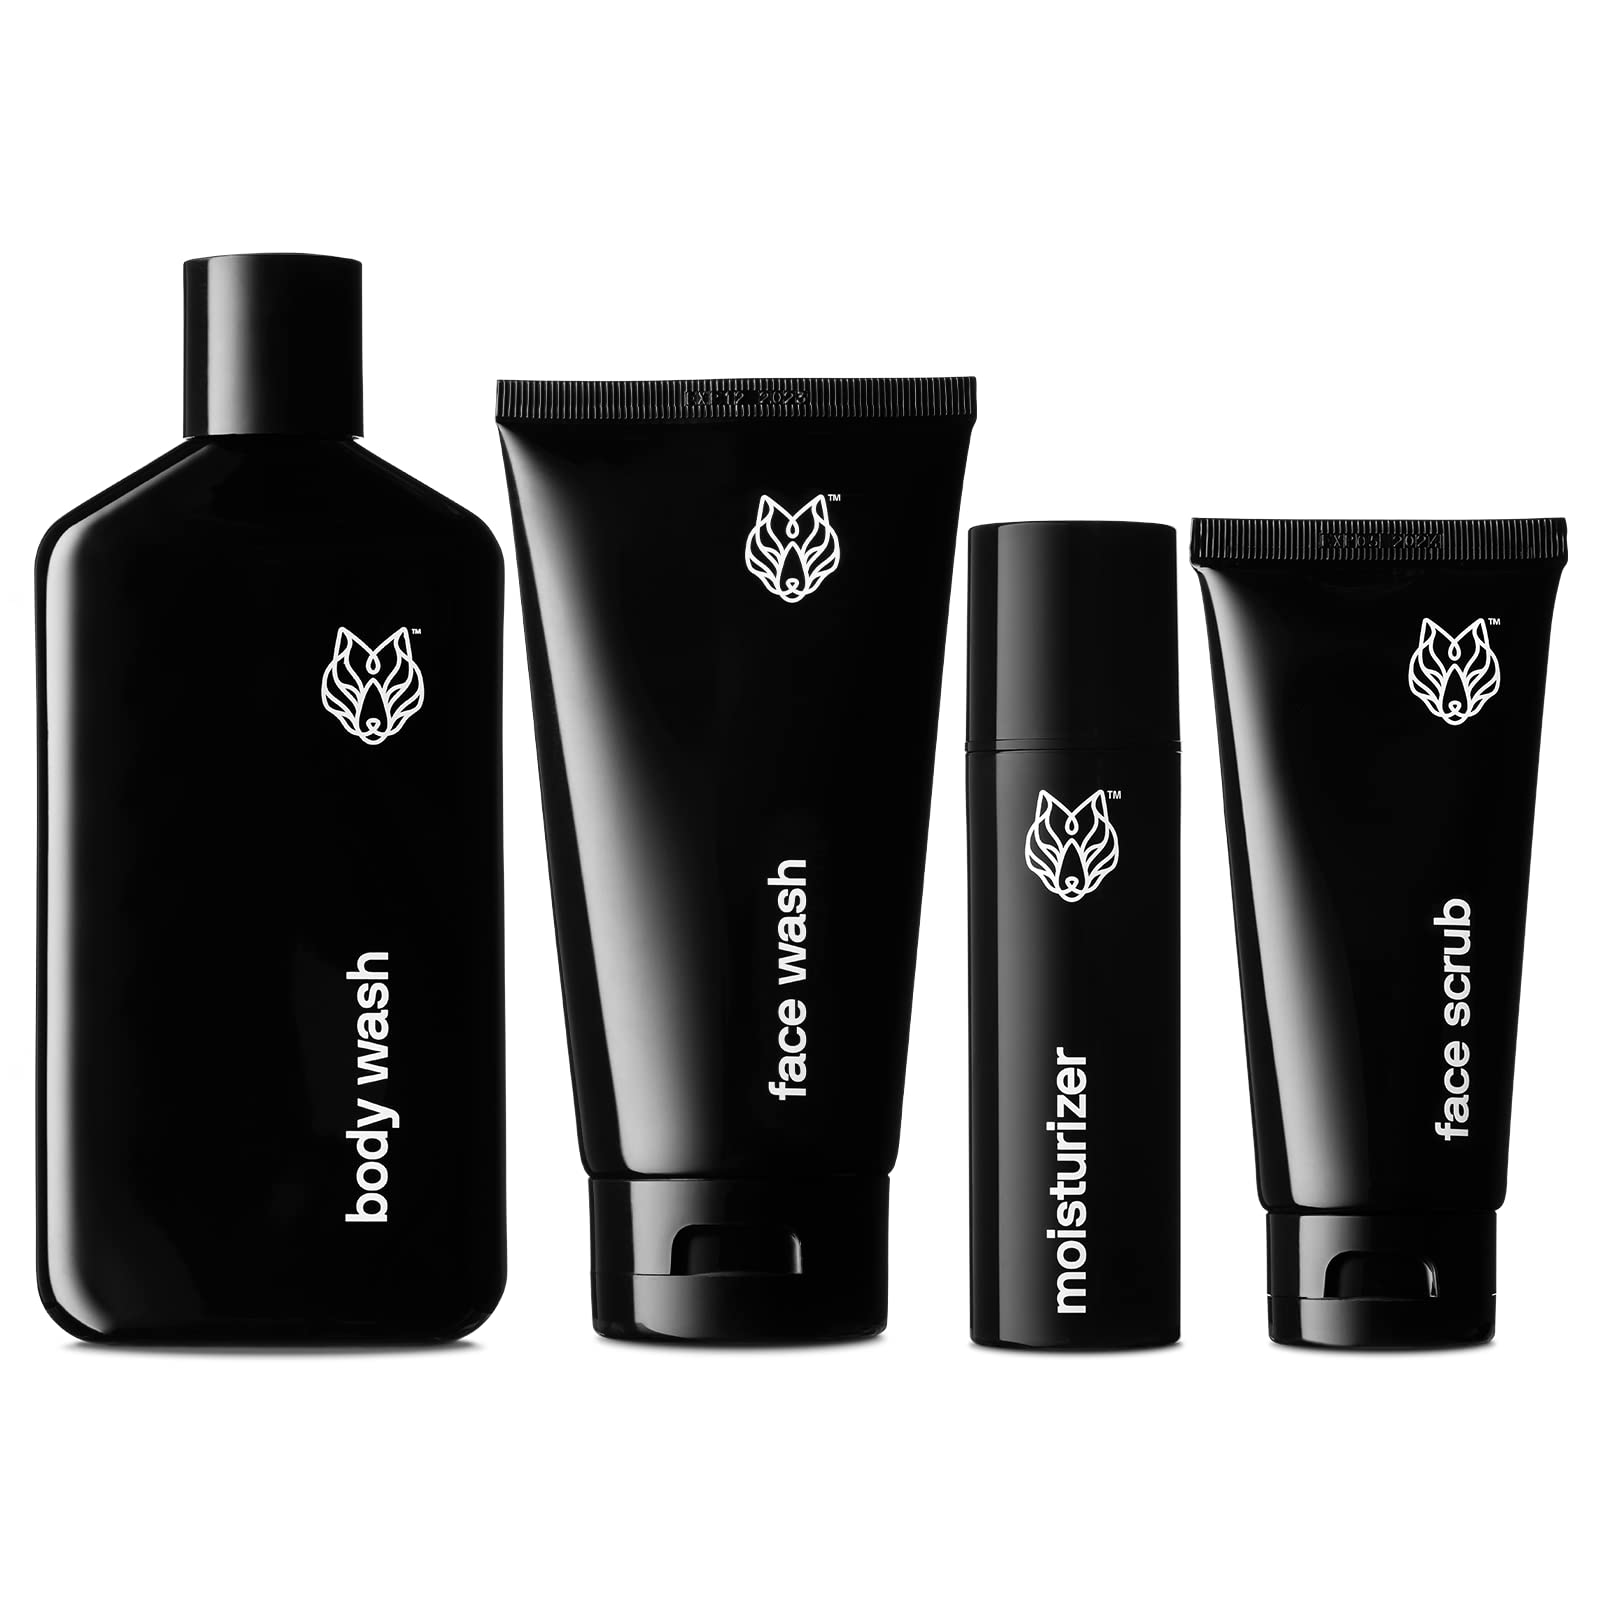 Black Wolf Shower Bundle for Oily Skin - 4pc Bundle- Includes Body Wash, Face Wash, Facial Scrub and Oil-Free Moisturize- Charcoal Powder and Salicylic Acid Reduce Acne Breakouts and Cleanse Your Skin